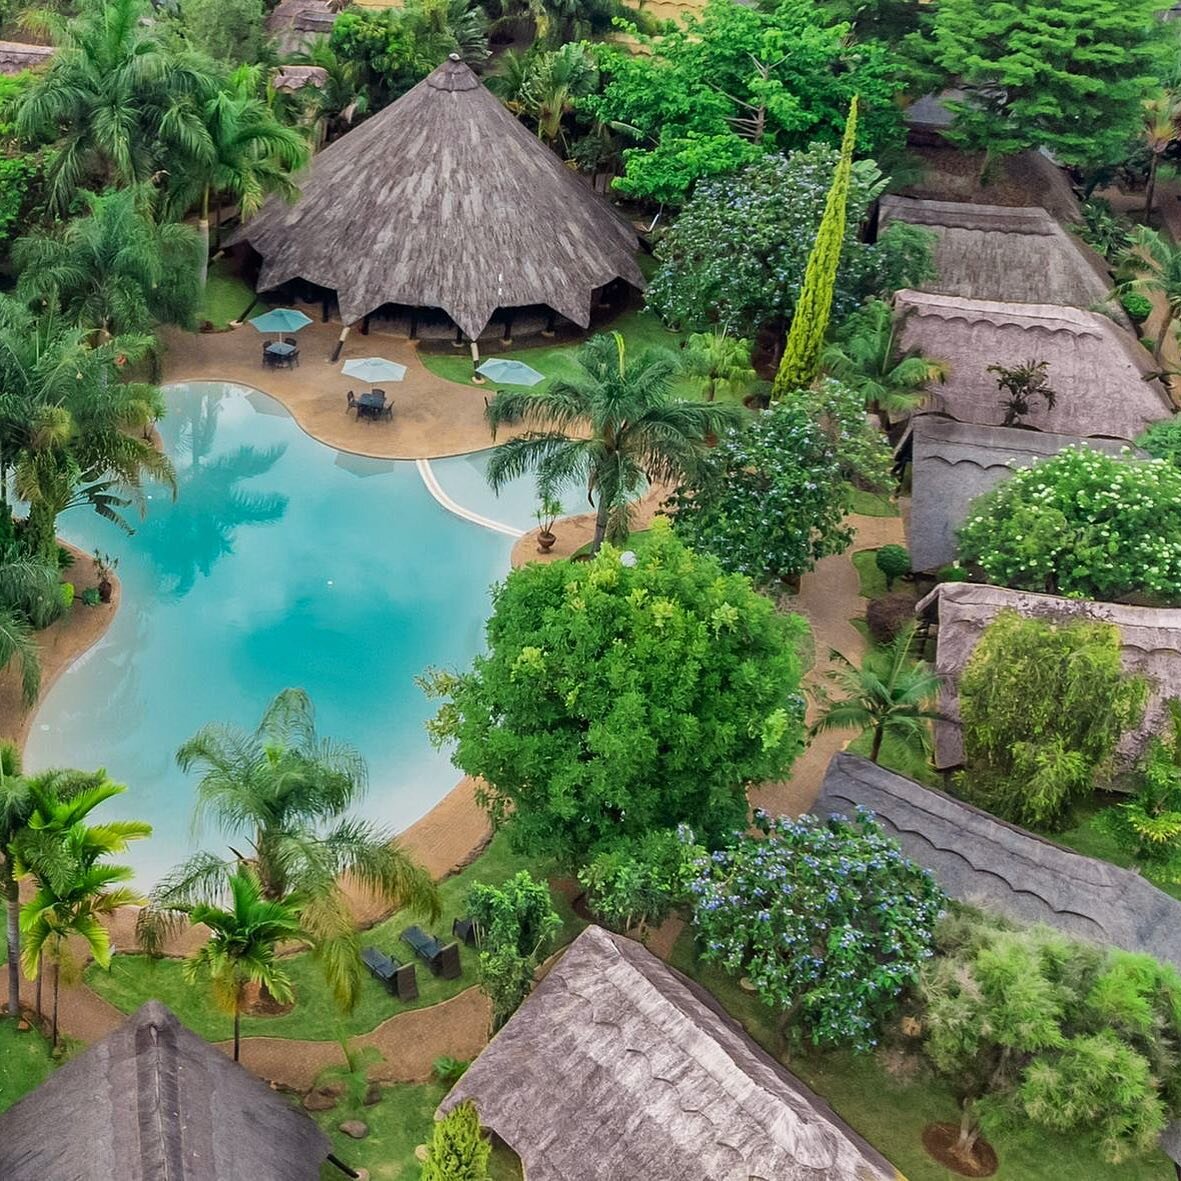 A birds eye view of some of our luxurious thatched chalets set amongst beautifully landscaped tropical gardens. When are you staying over? #sandyscreationsresort